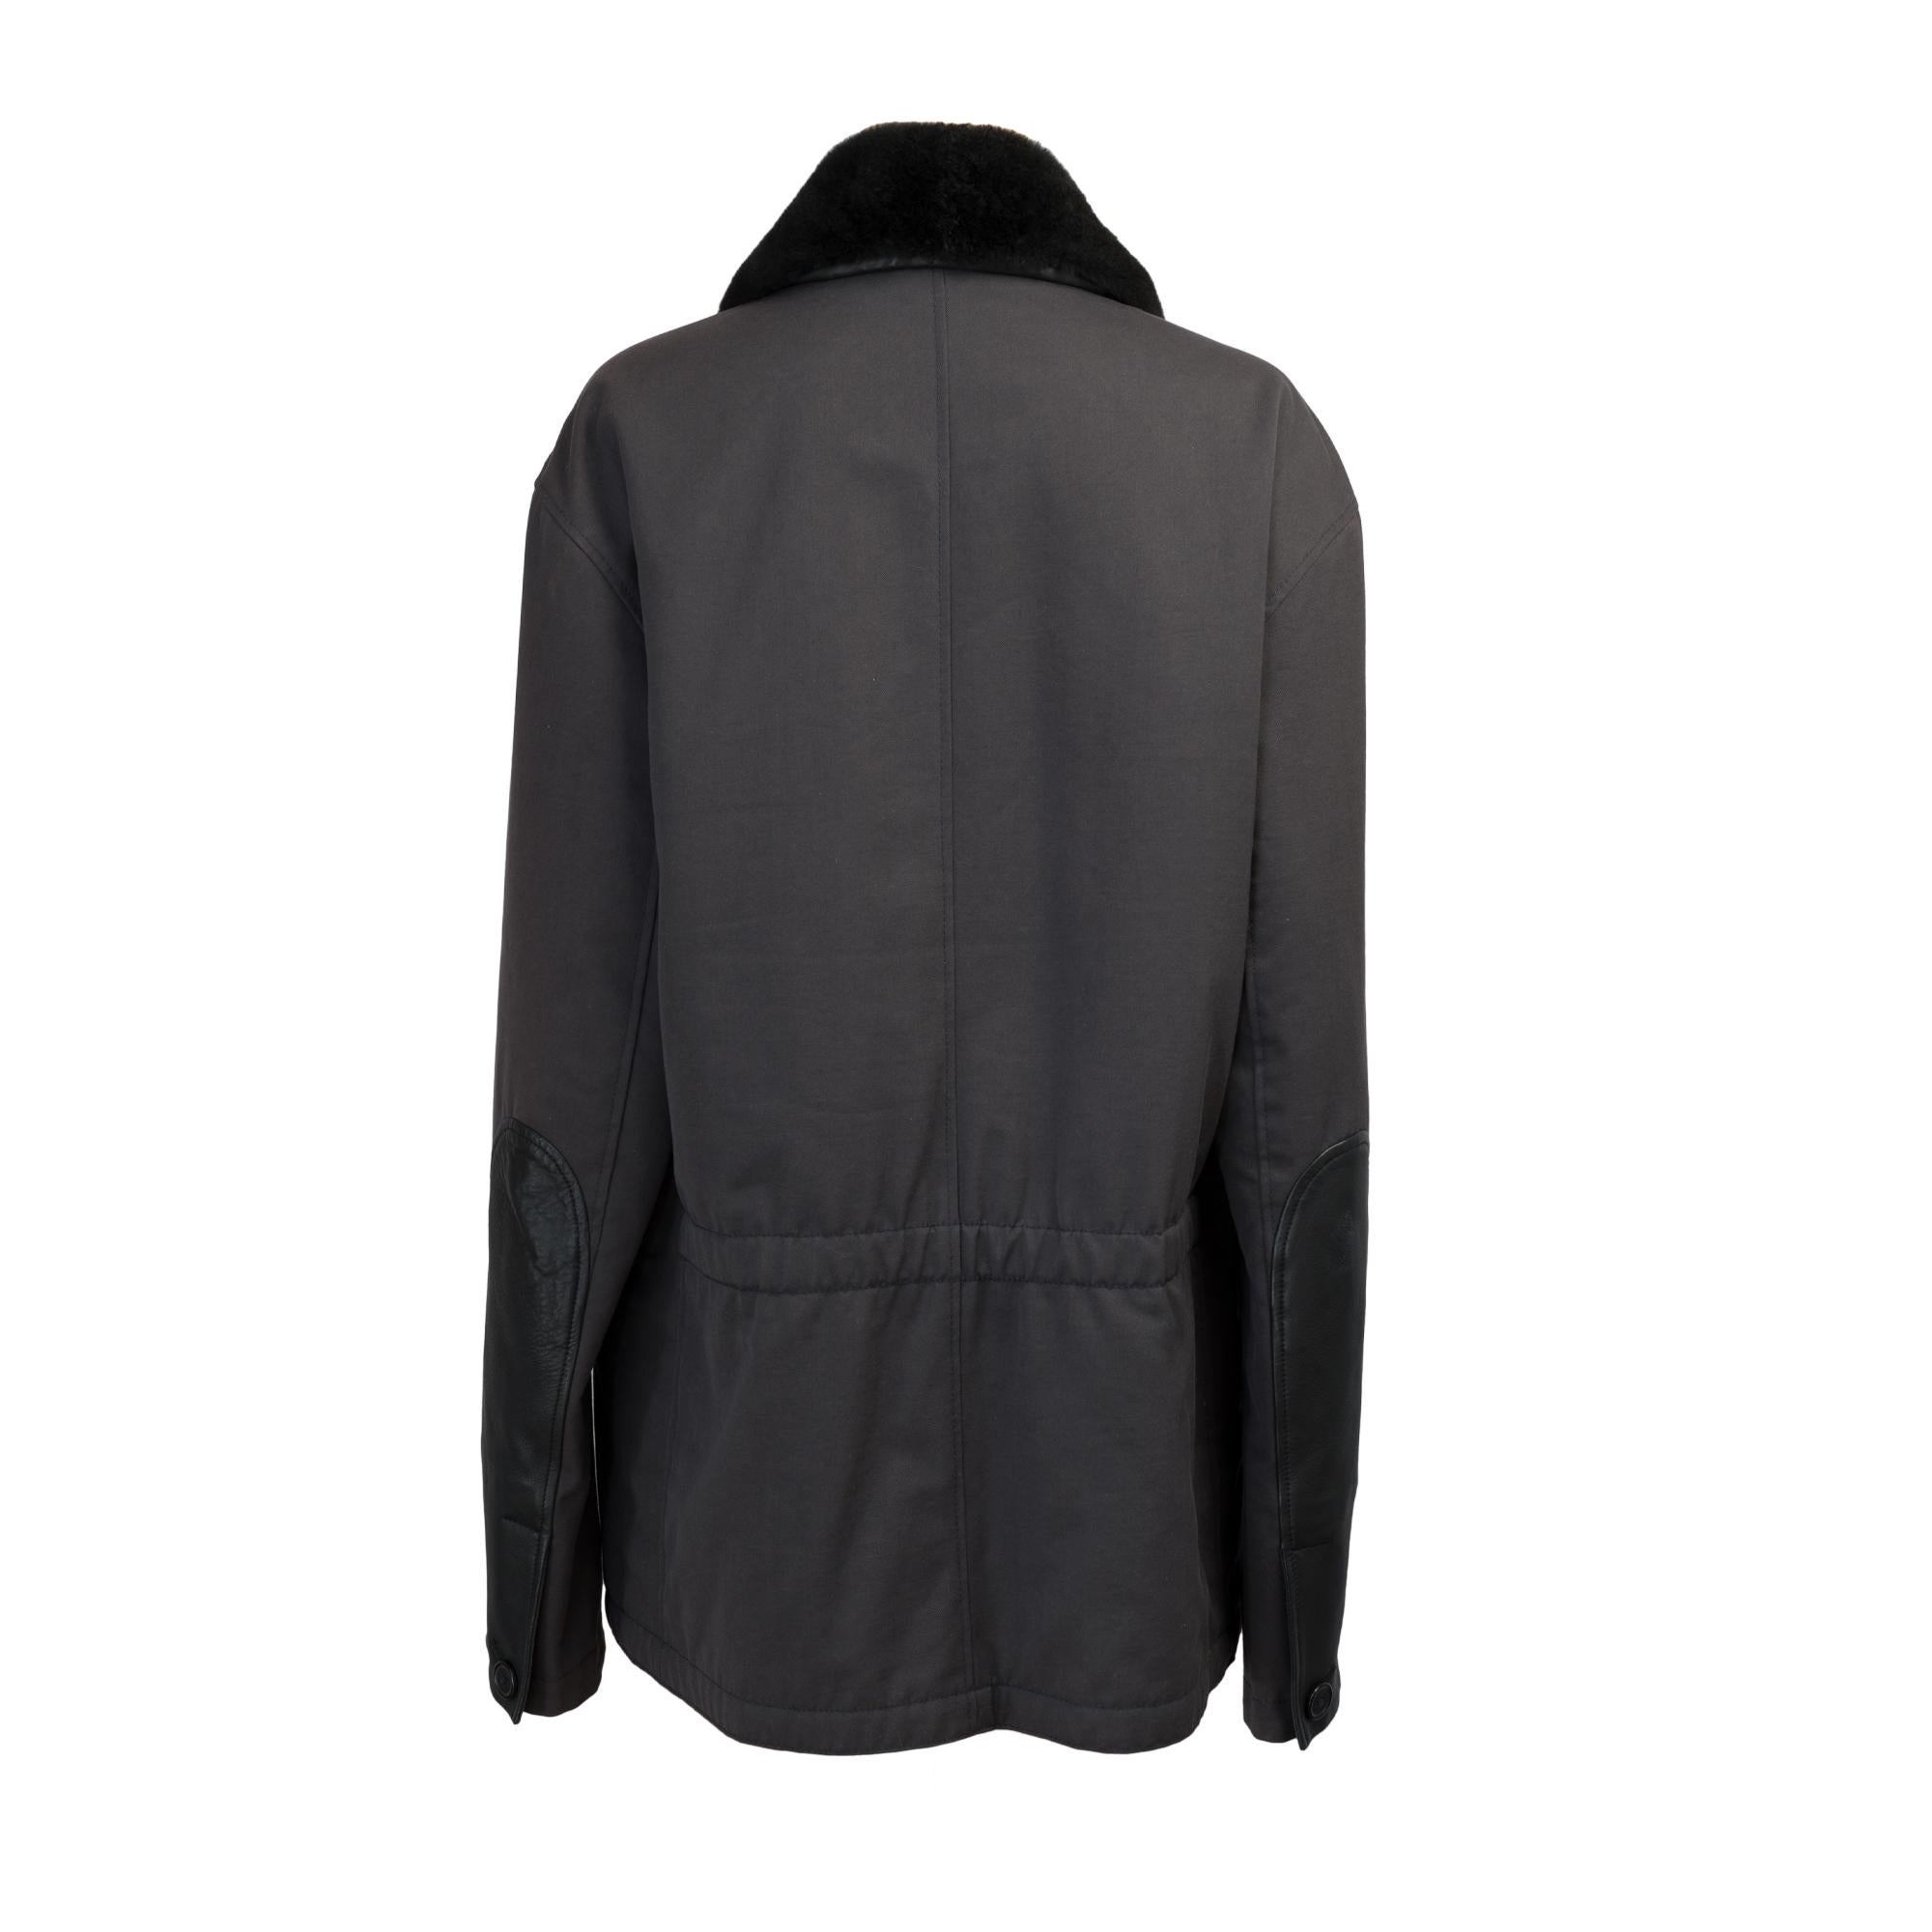 Beautiful Hermès man jacket in black canvas, partly leather and silver metal hardware
Removable collar in ragondin and leather
Composition: Cotton, wool, calf and lamb leather, polyester
Size: 52
Shoulder width: 50cm
Handle length: 62cm
Quilted